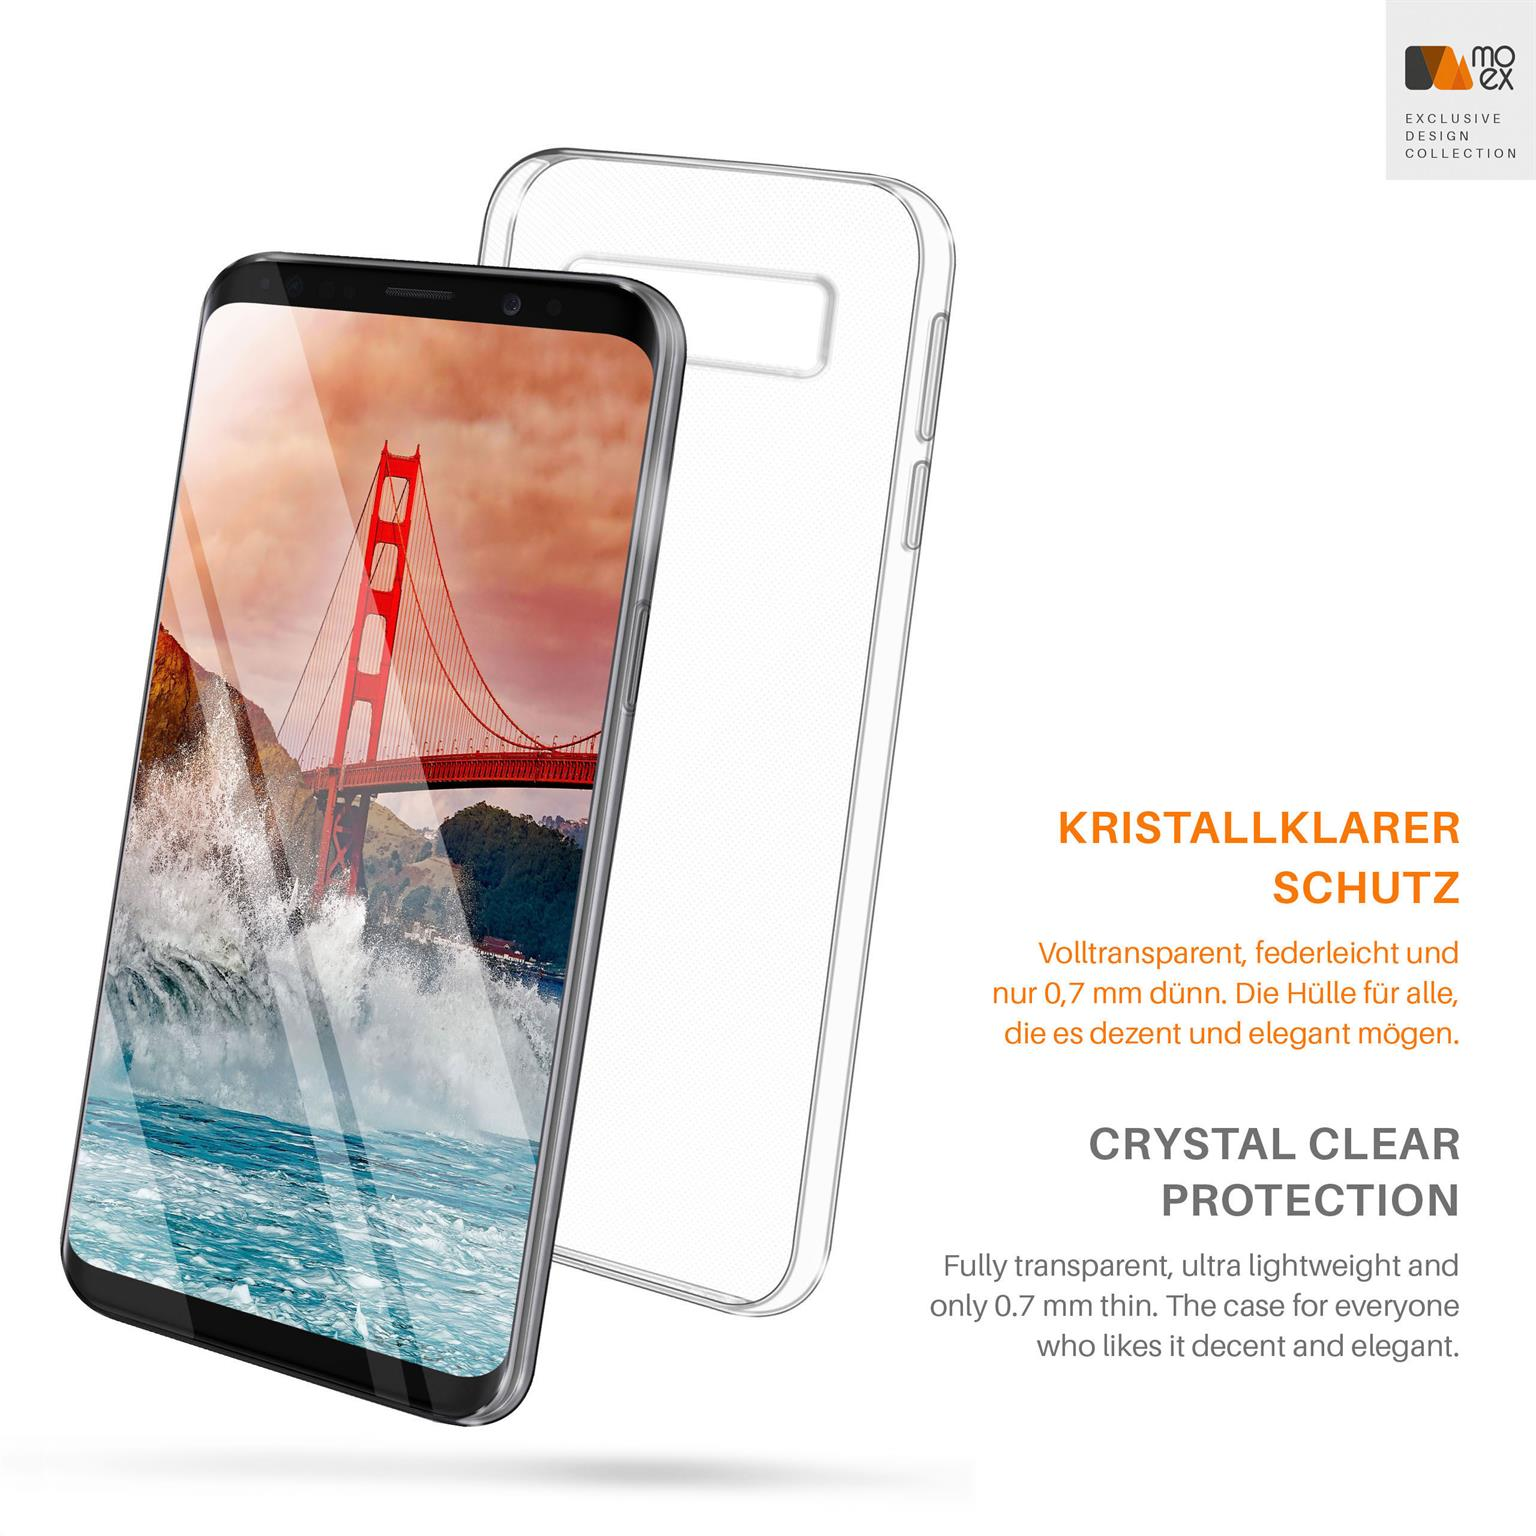 Backcover, Crystal-Clear Samsung, MOEX Galaxy Aero 8, Note Case,